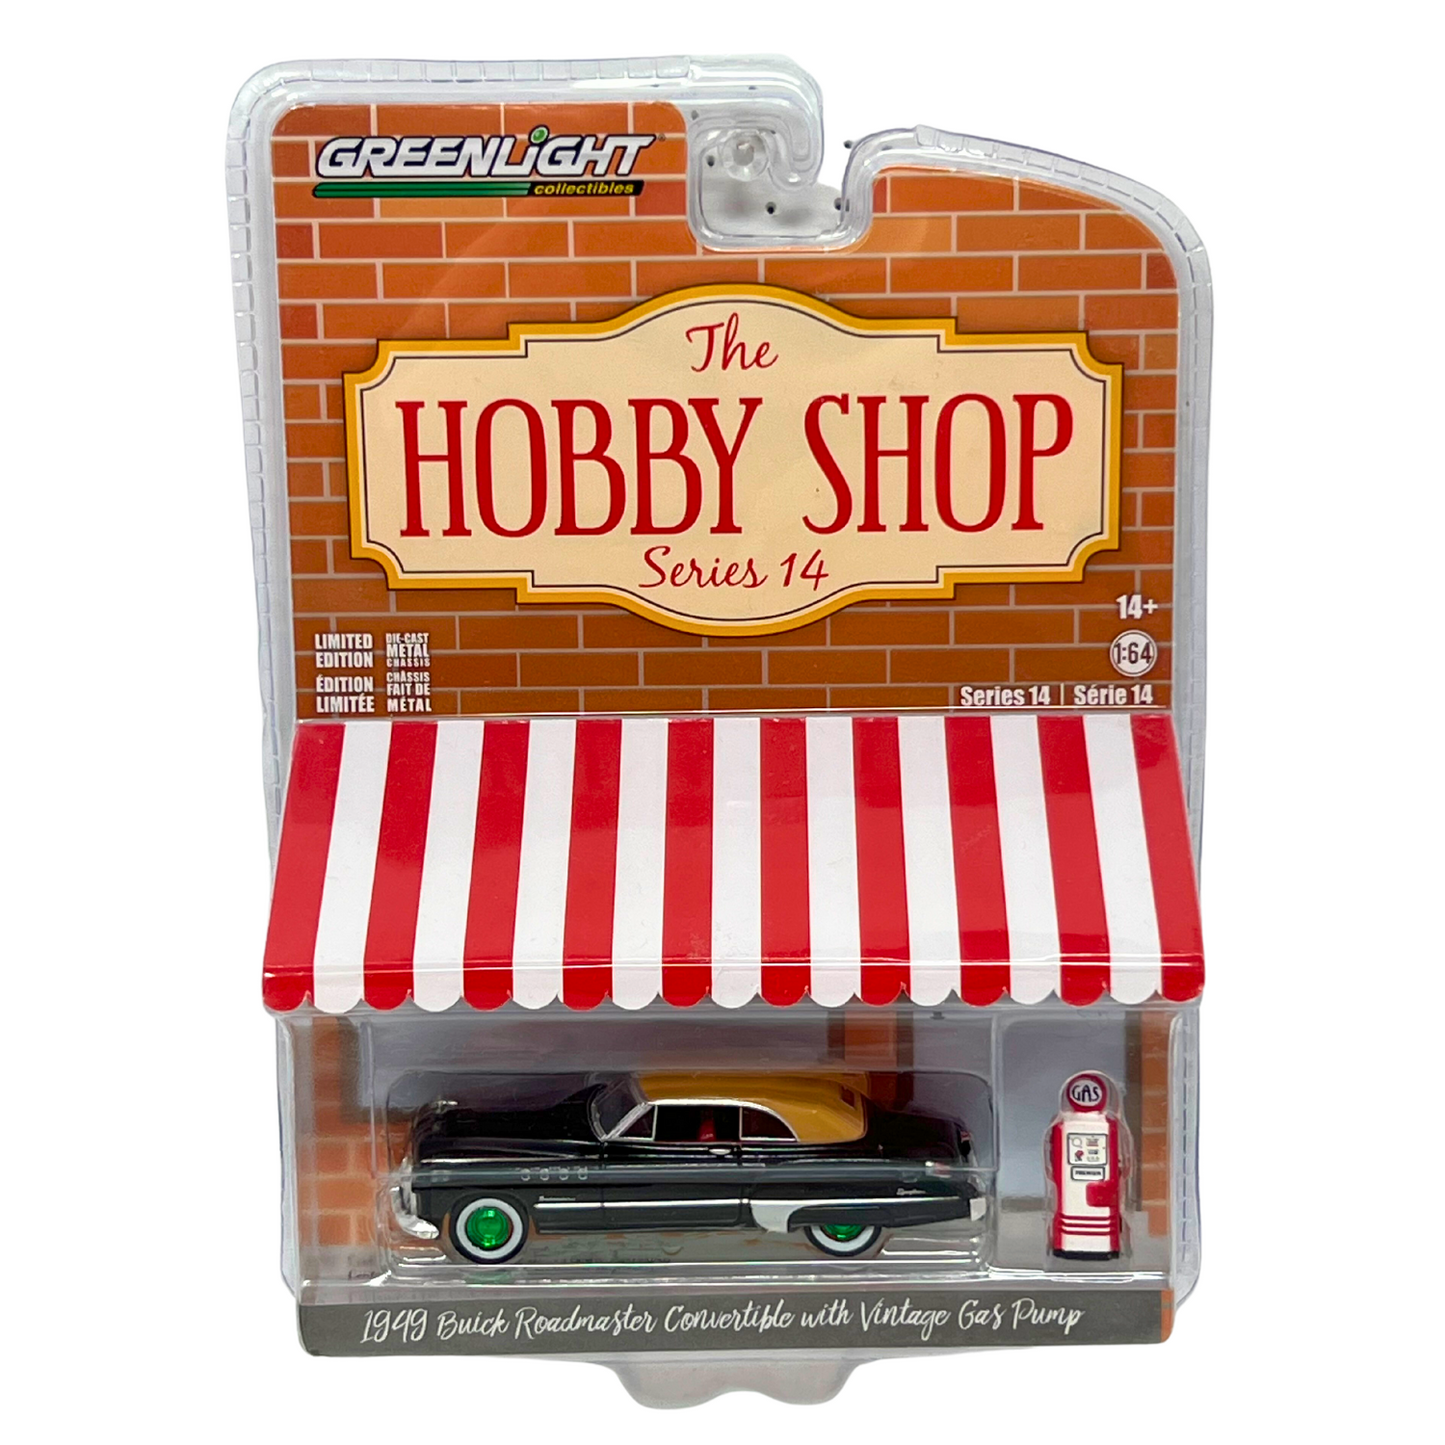 Greenlight Hobby Shop 1949 Buick with Gas Pump GREEN MACHINE 1:64 Diecast